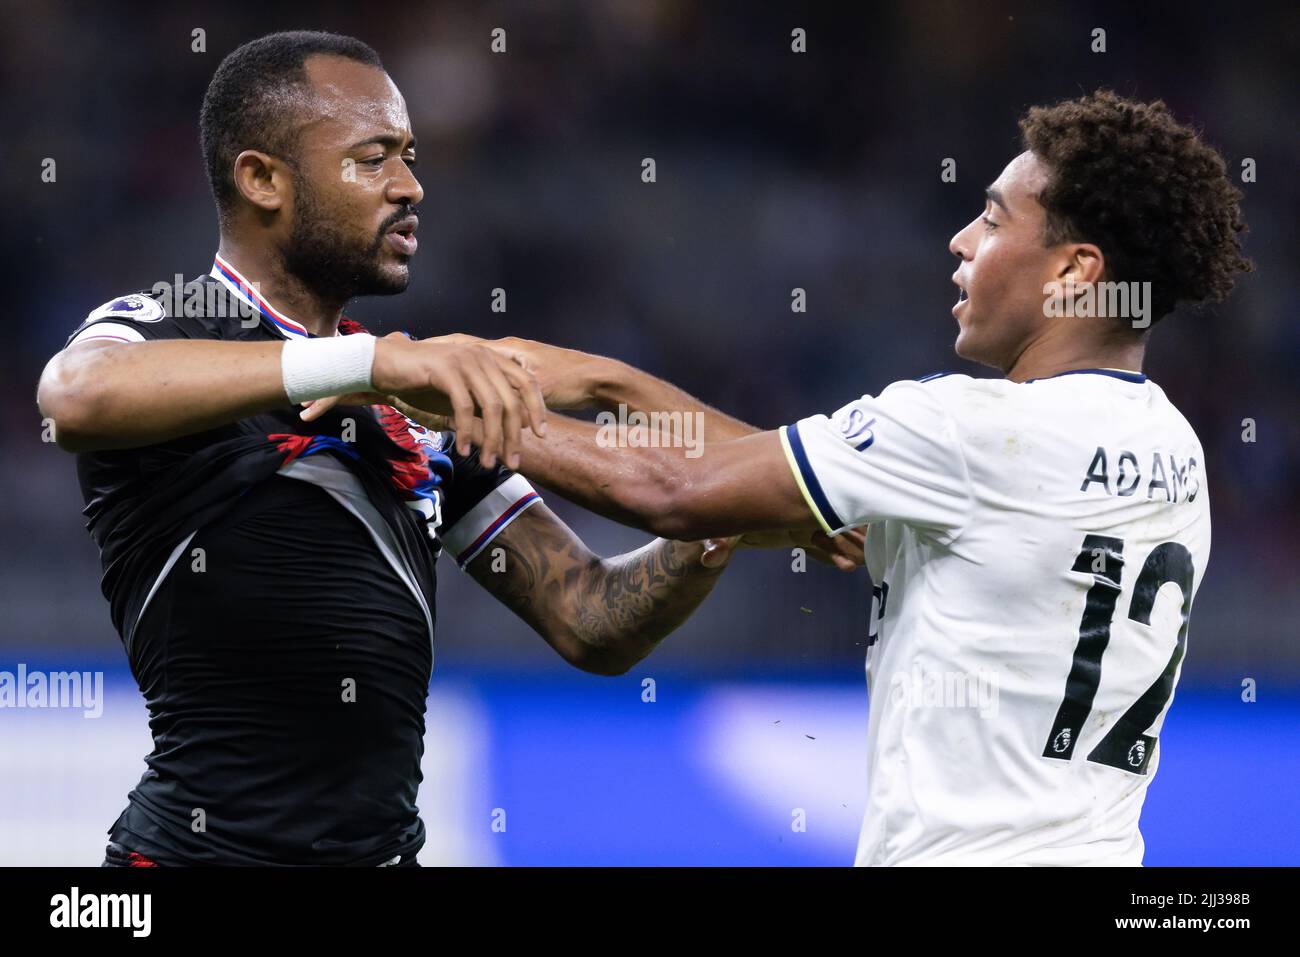 Perth, Australia, 22 July, 2022. Jordan Ayew of Crystal Palace and Tyler Adams of Leeds United scuffle during the ICON Festival of International Football match between Crystal Palace and Leeds United at Optus Stadium on July 22, 2022 in Perth, Australia. Credit: Graham Conaty/Speed Media/Alamy Live News Stock Photo